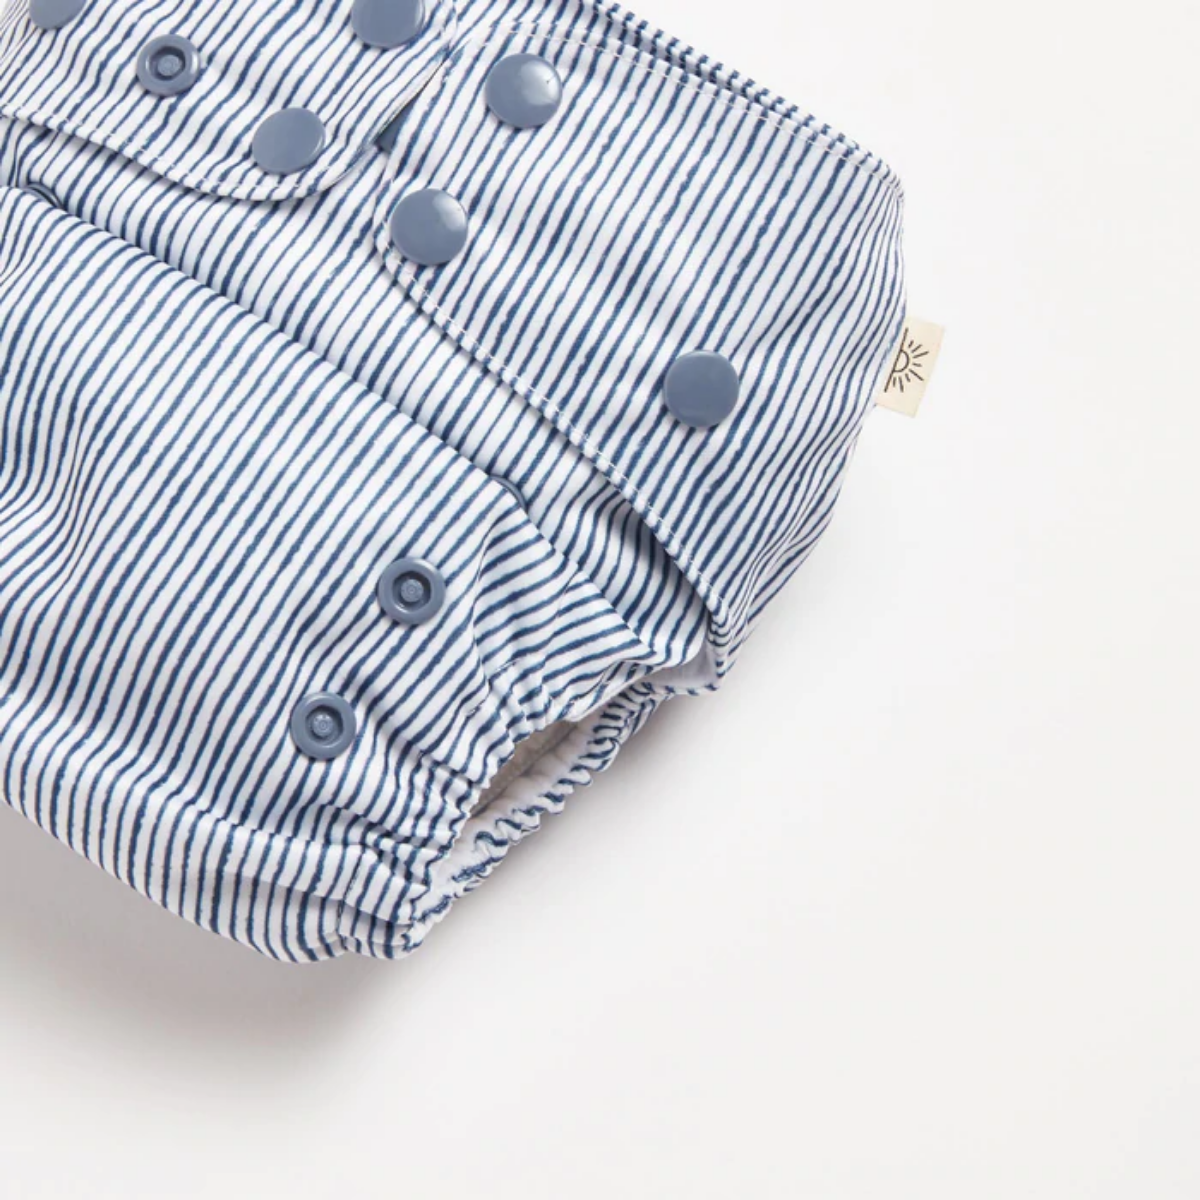 A close up of Indigo Pinstripe 2.0 Modern Cloth Nappy by EcoNaps on a white background.